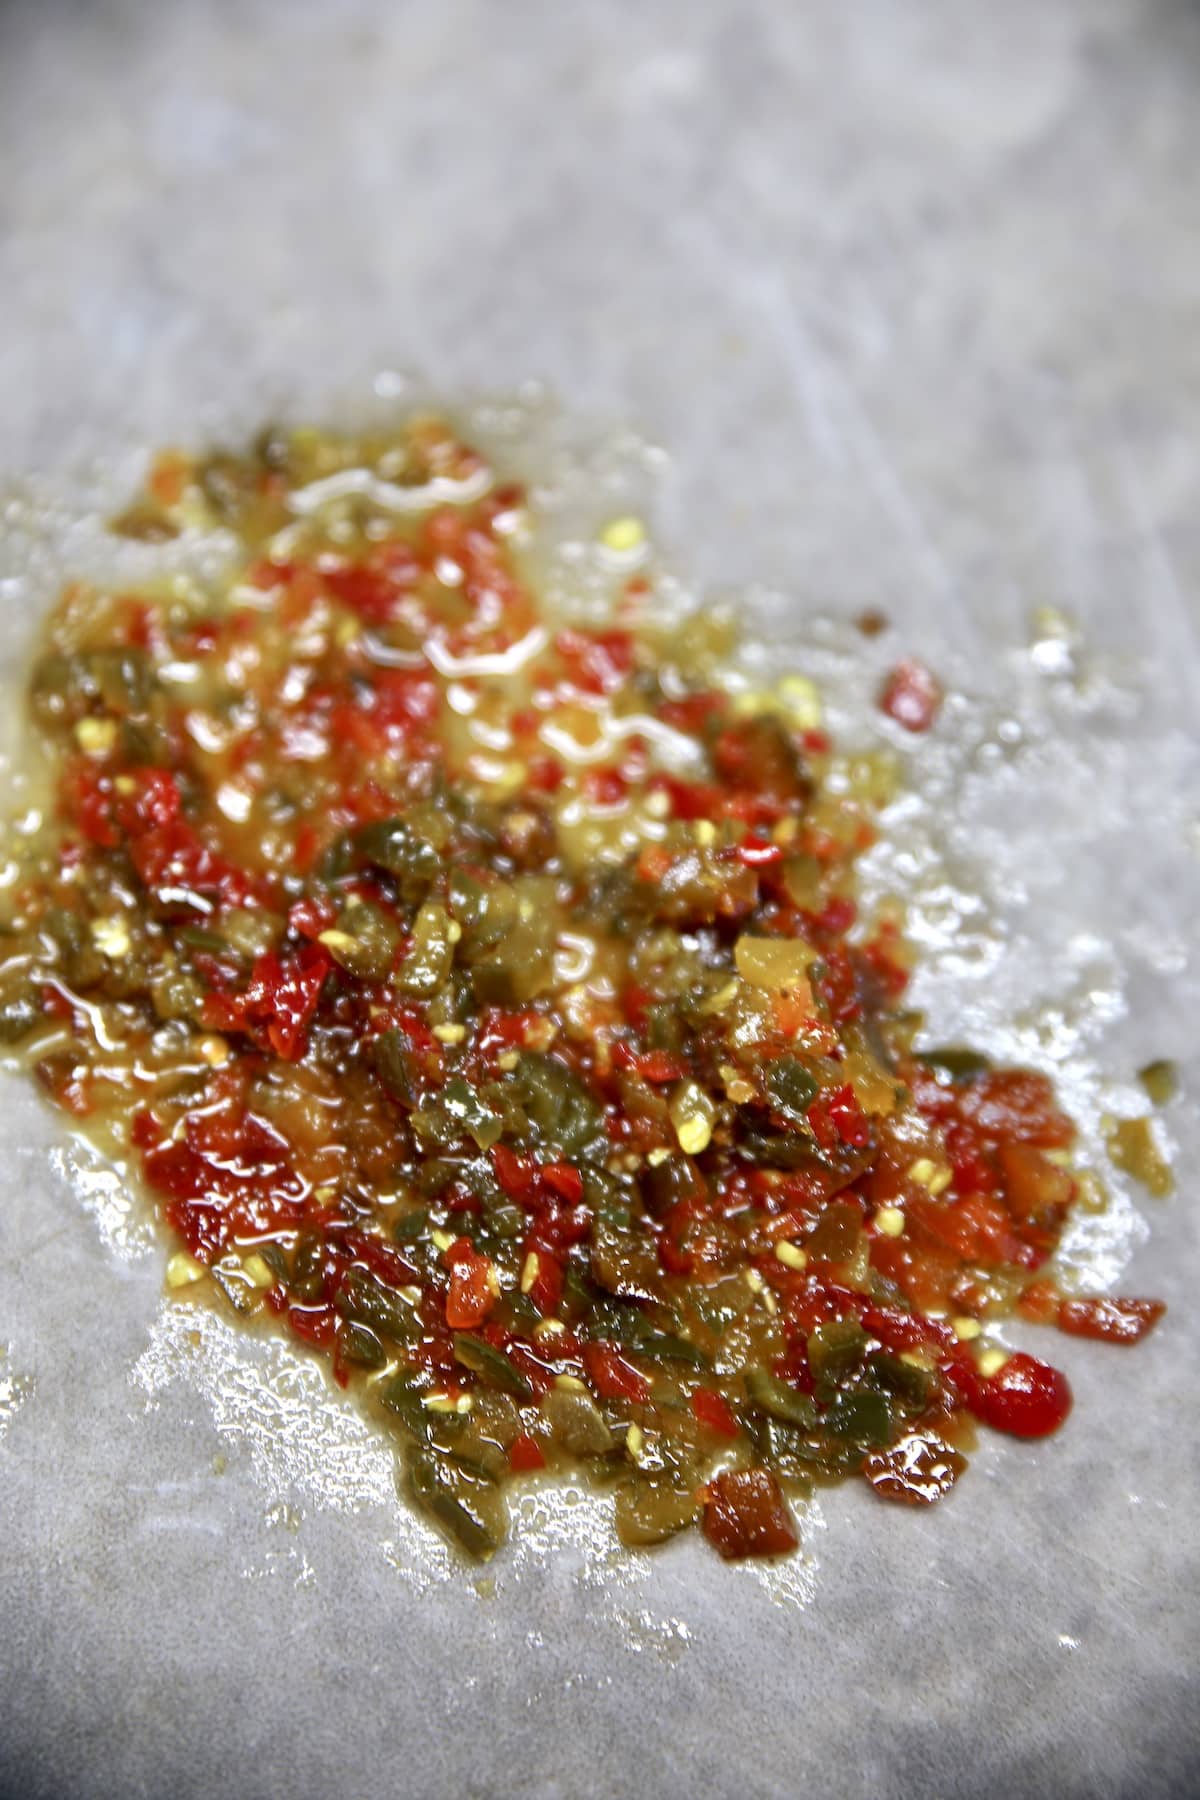 Finely diced red and green candied jalapenos.